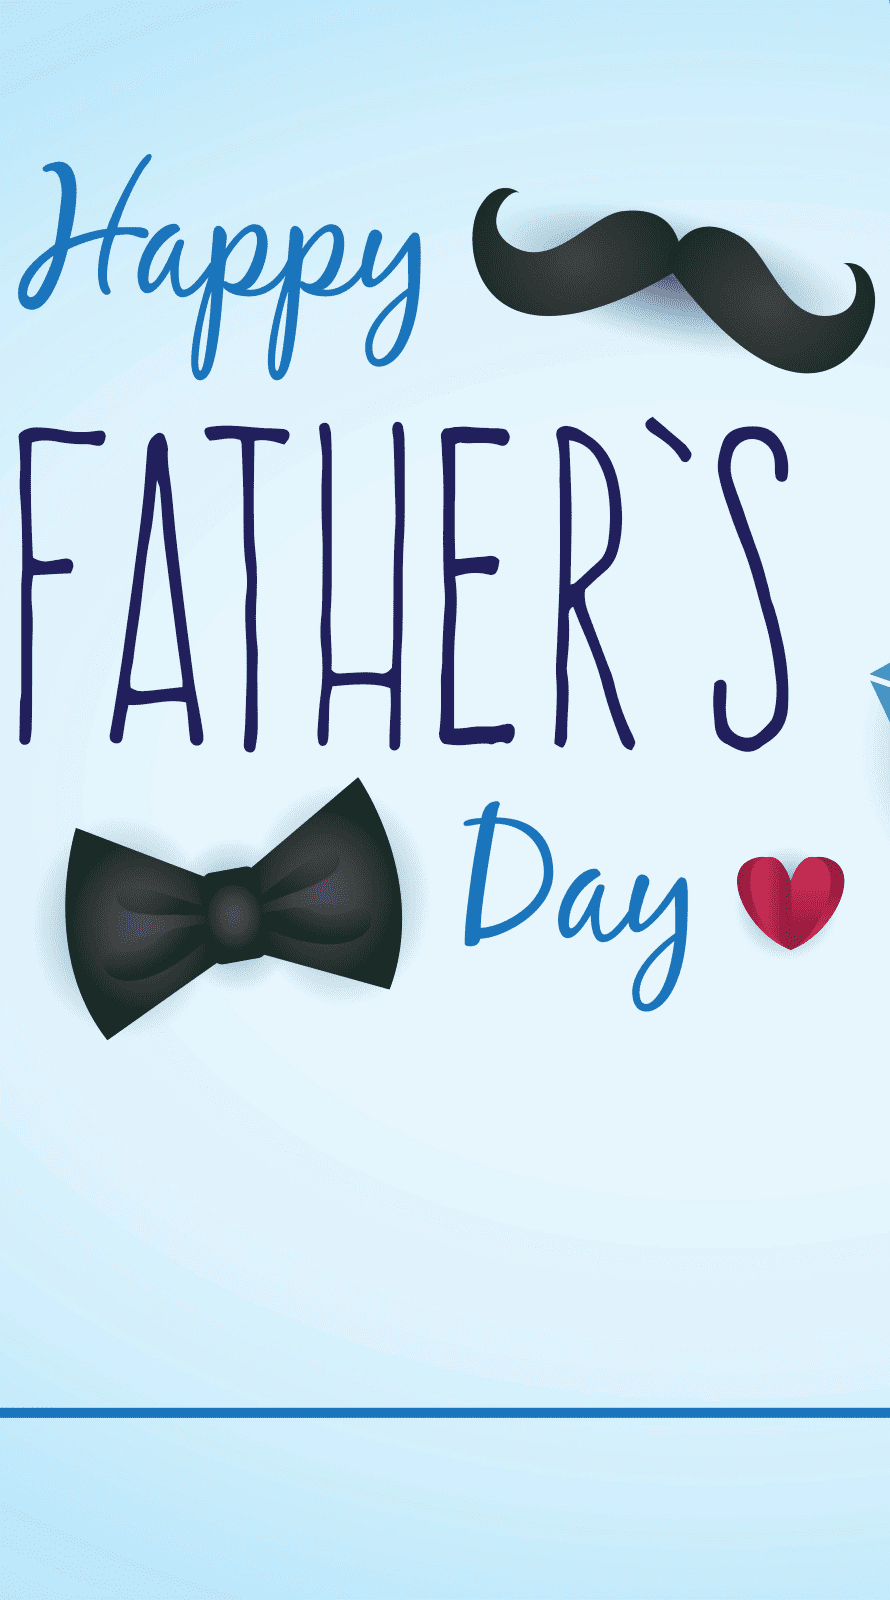 Cool fathers day quotes wallpaper dia del padre happy fathers day image 2022, Best iPhone Wallpaper and iPhone background, WallpaperUpdate, Best iPhone Wallpaper and iPhone background